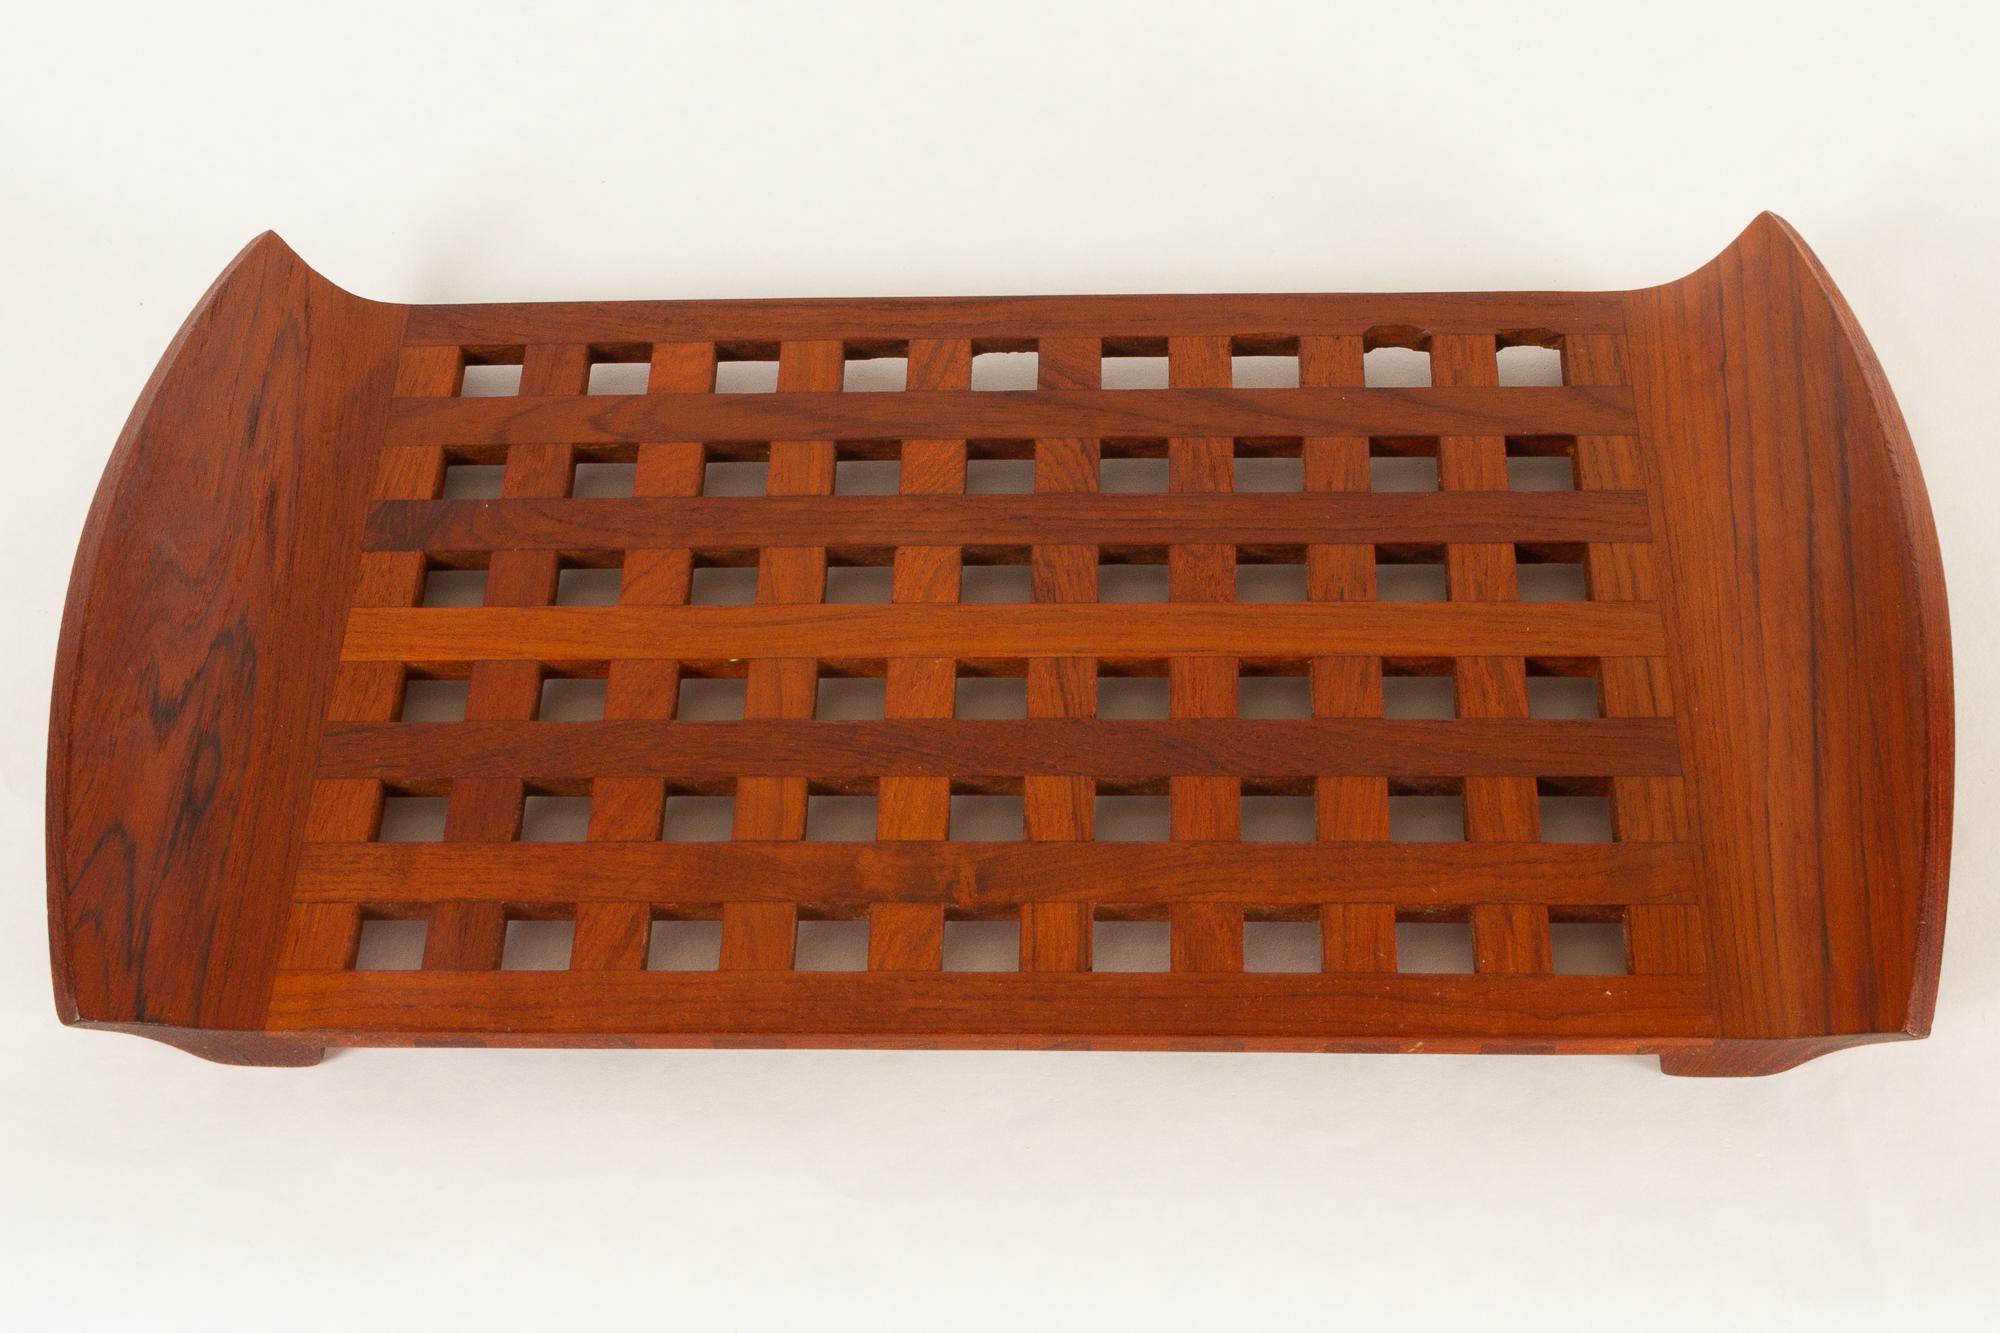 Vintage Danish Teak Tray with Glass Bowls by Jens Harald Quistgaard, 1960s For Sale 6